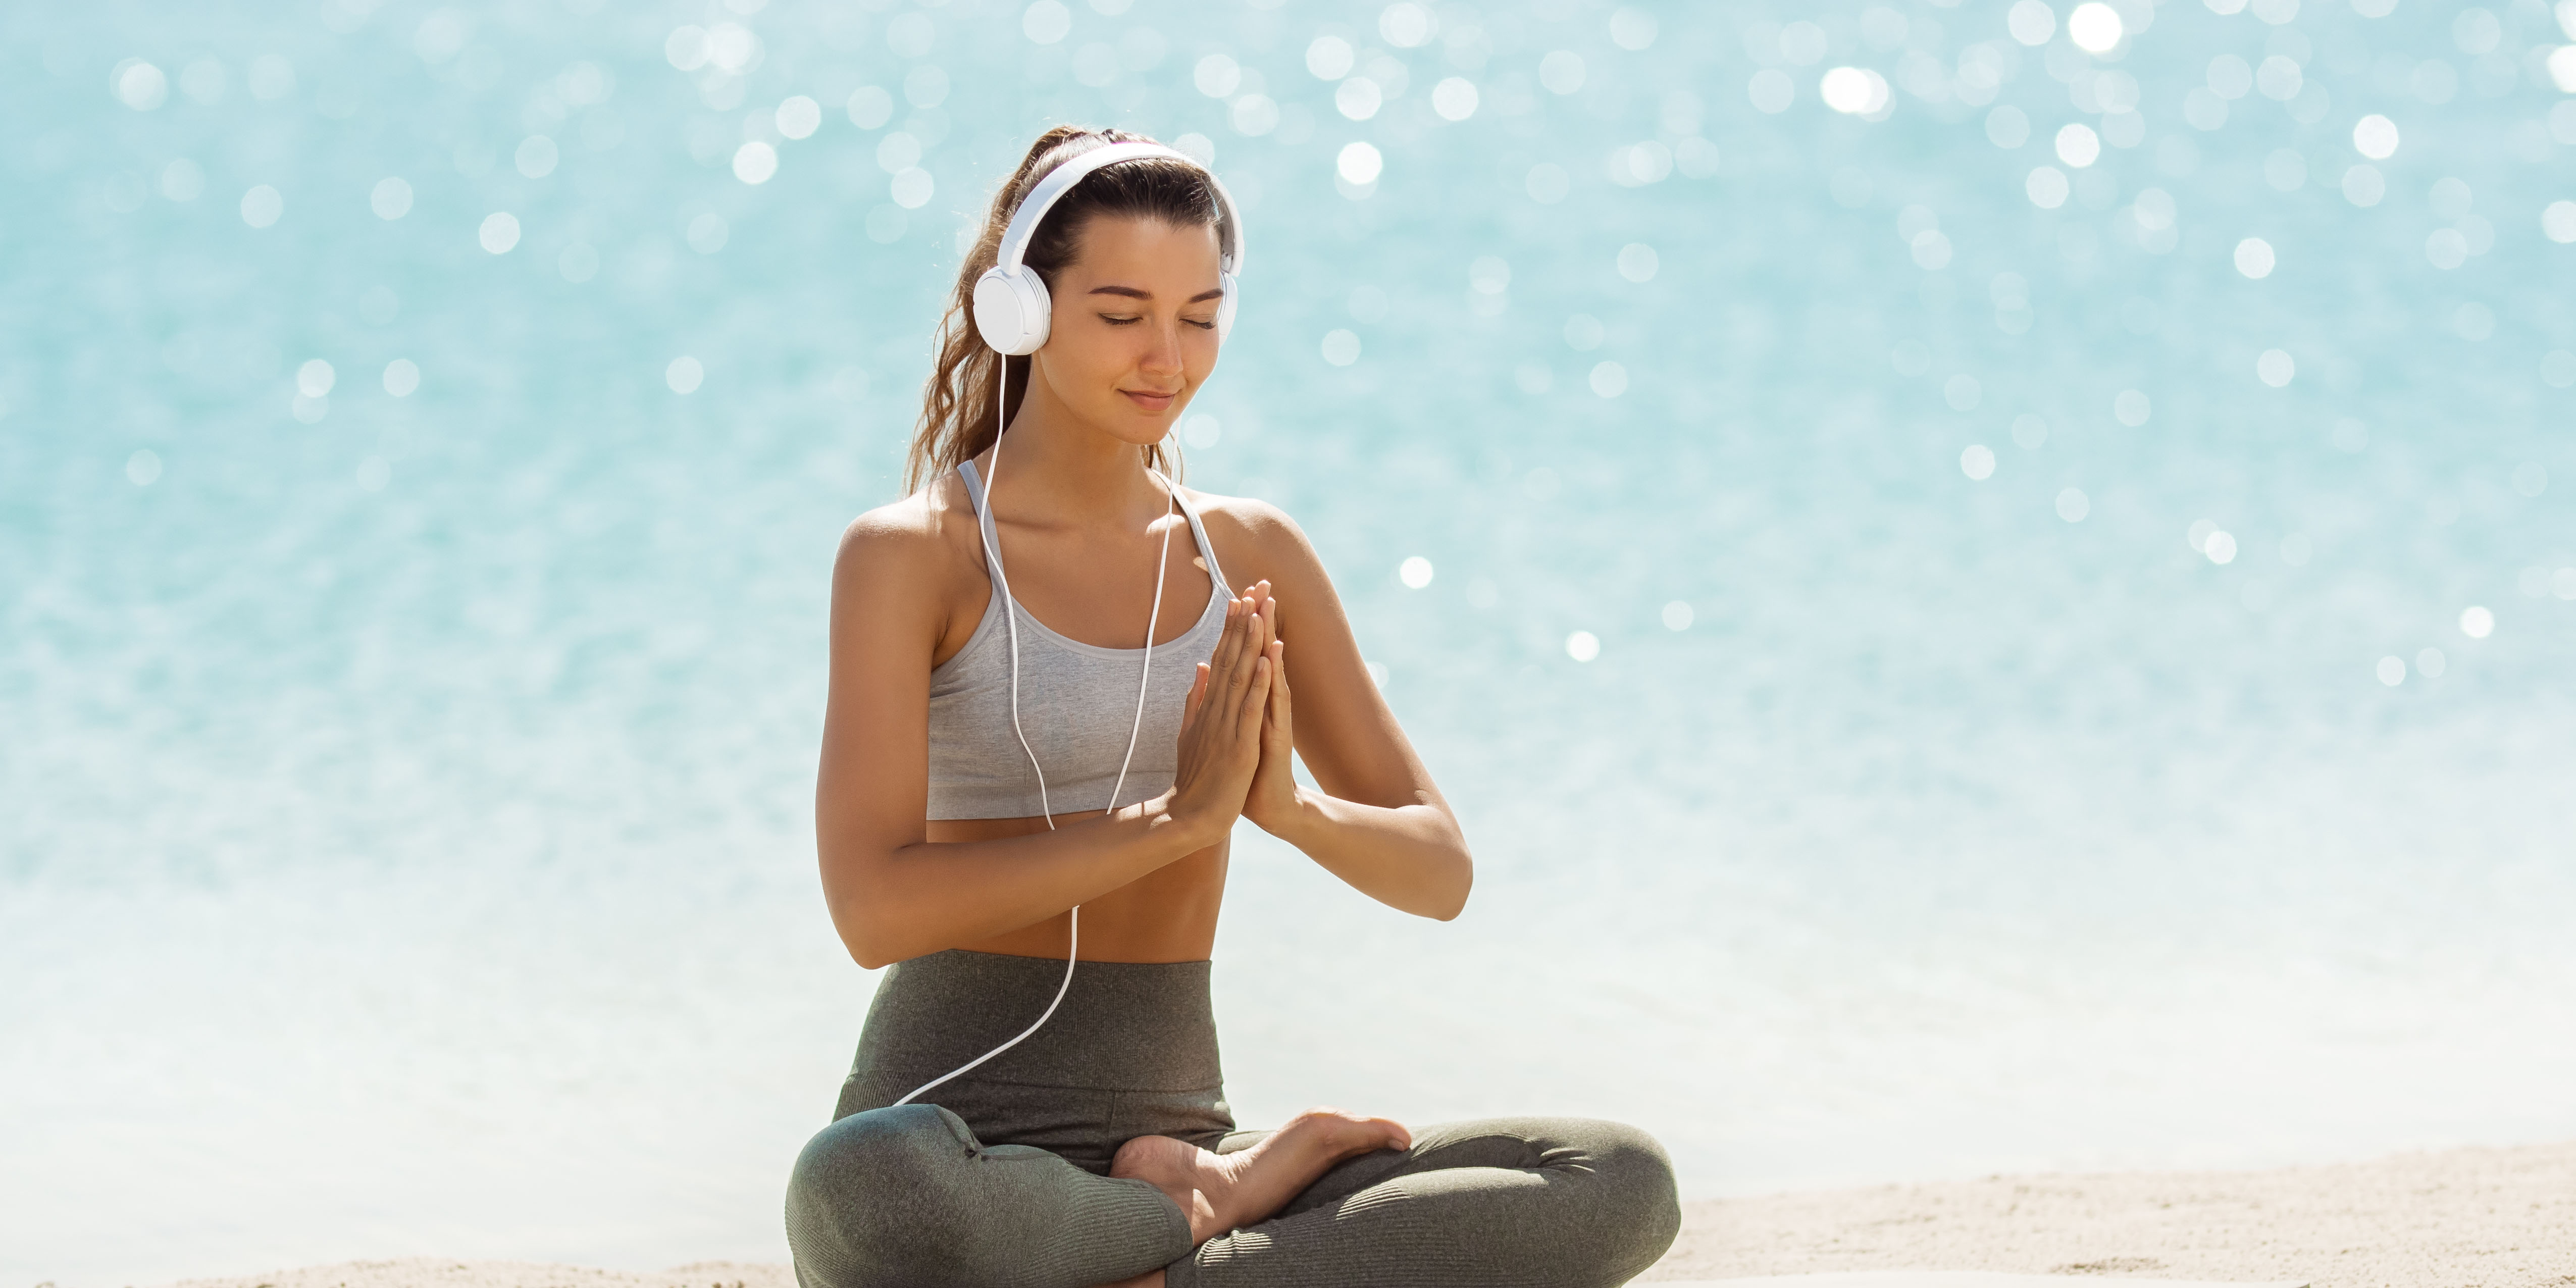 Music Streaming for Meditation, Yoga, Relaxation & Movement